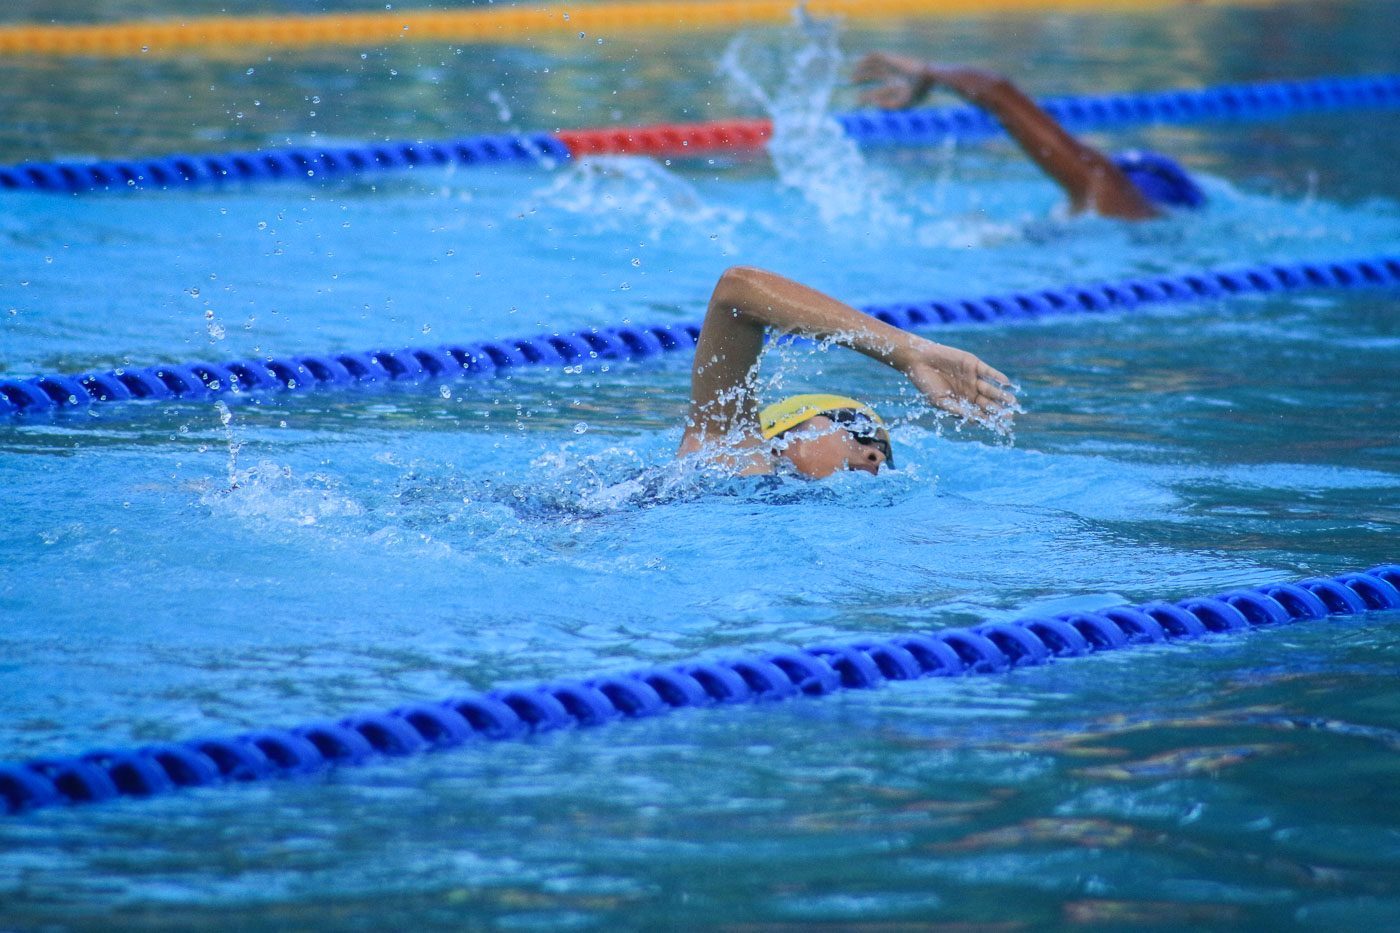 ROLLING IN THE DEEP. Swift water movements and proper pace of breathing are the pillars to conquer the pool water in the 800-meter freestyle swimming event of Palarong Pambansa 2017 